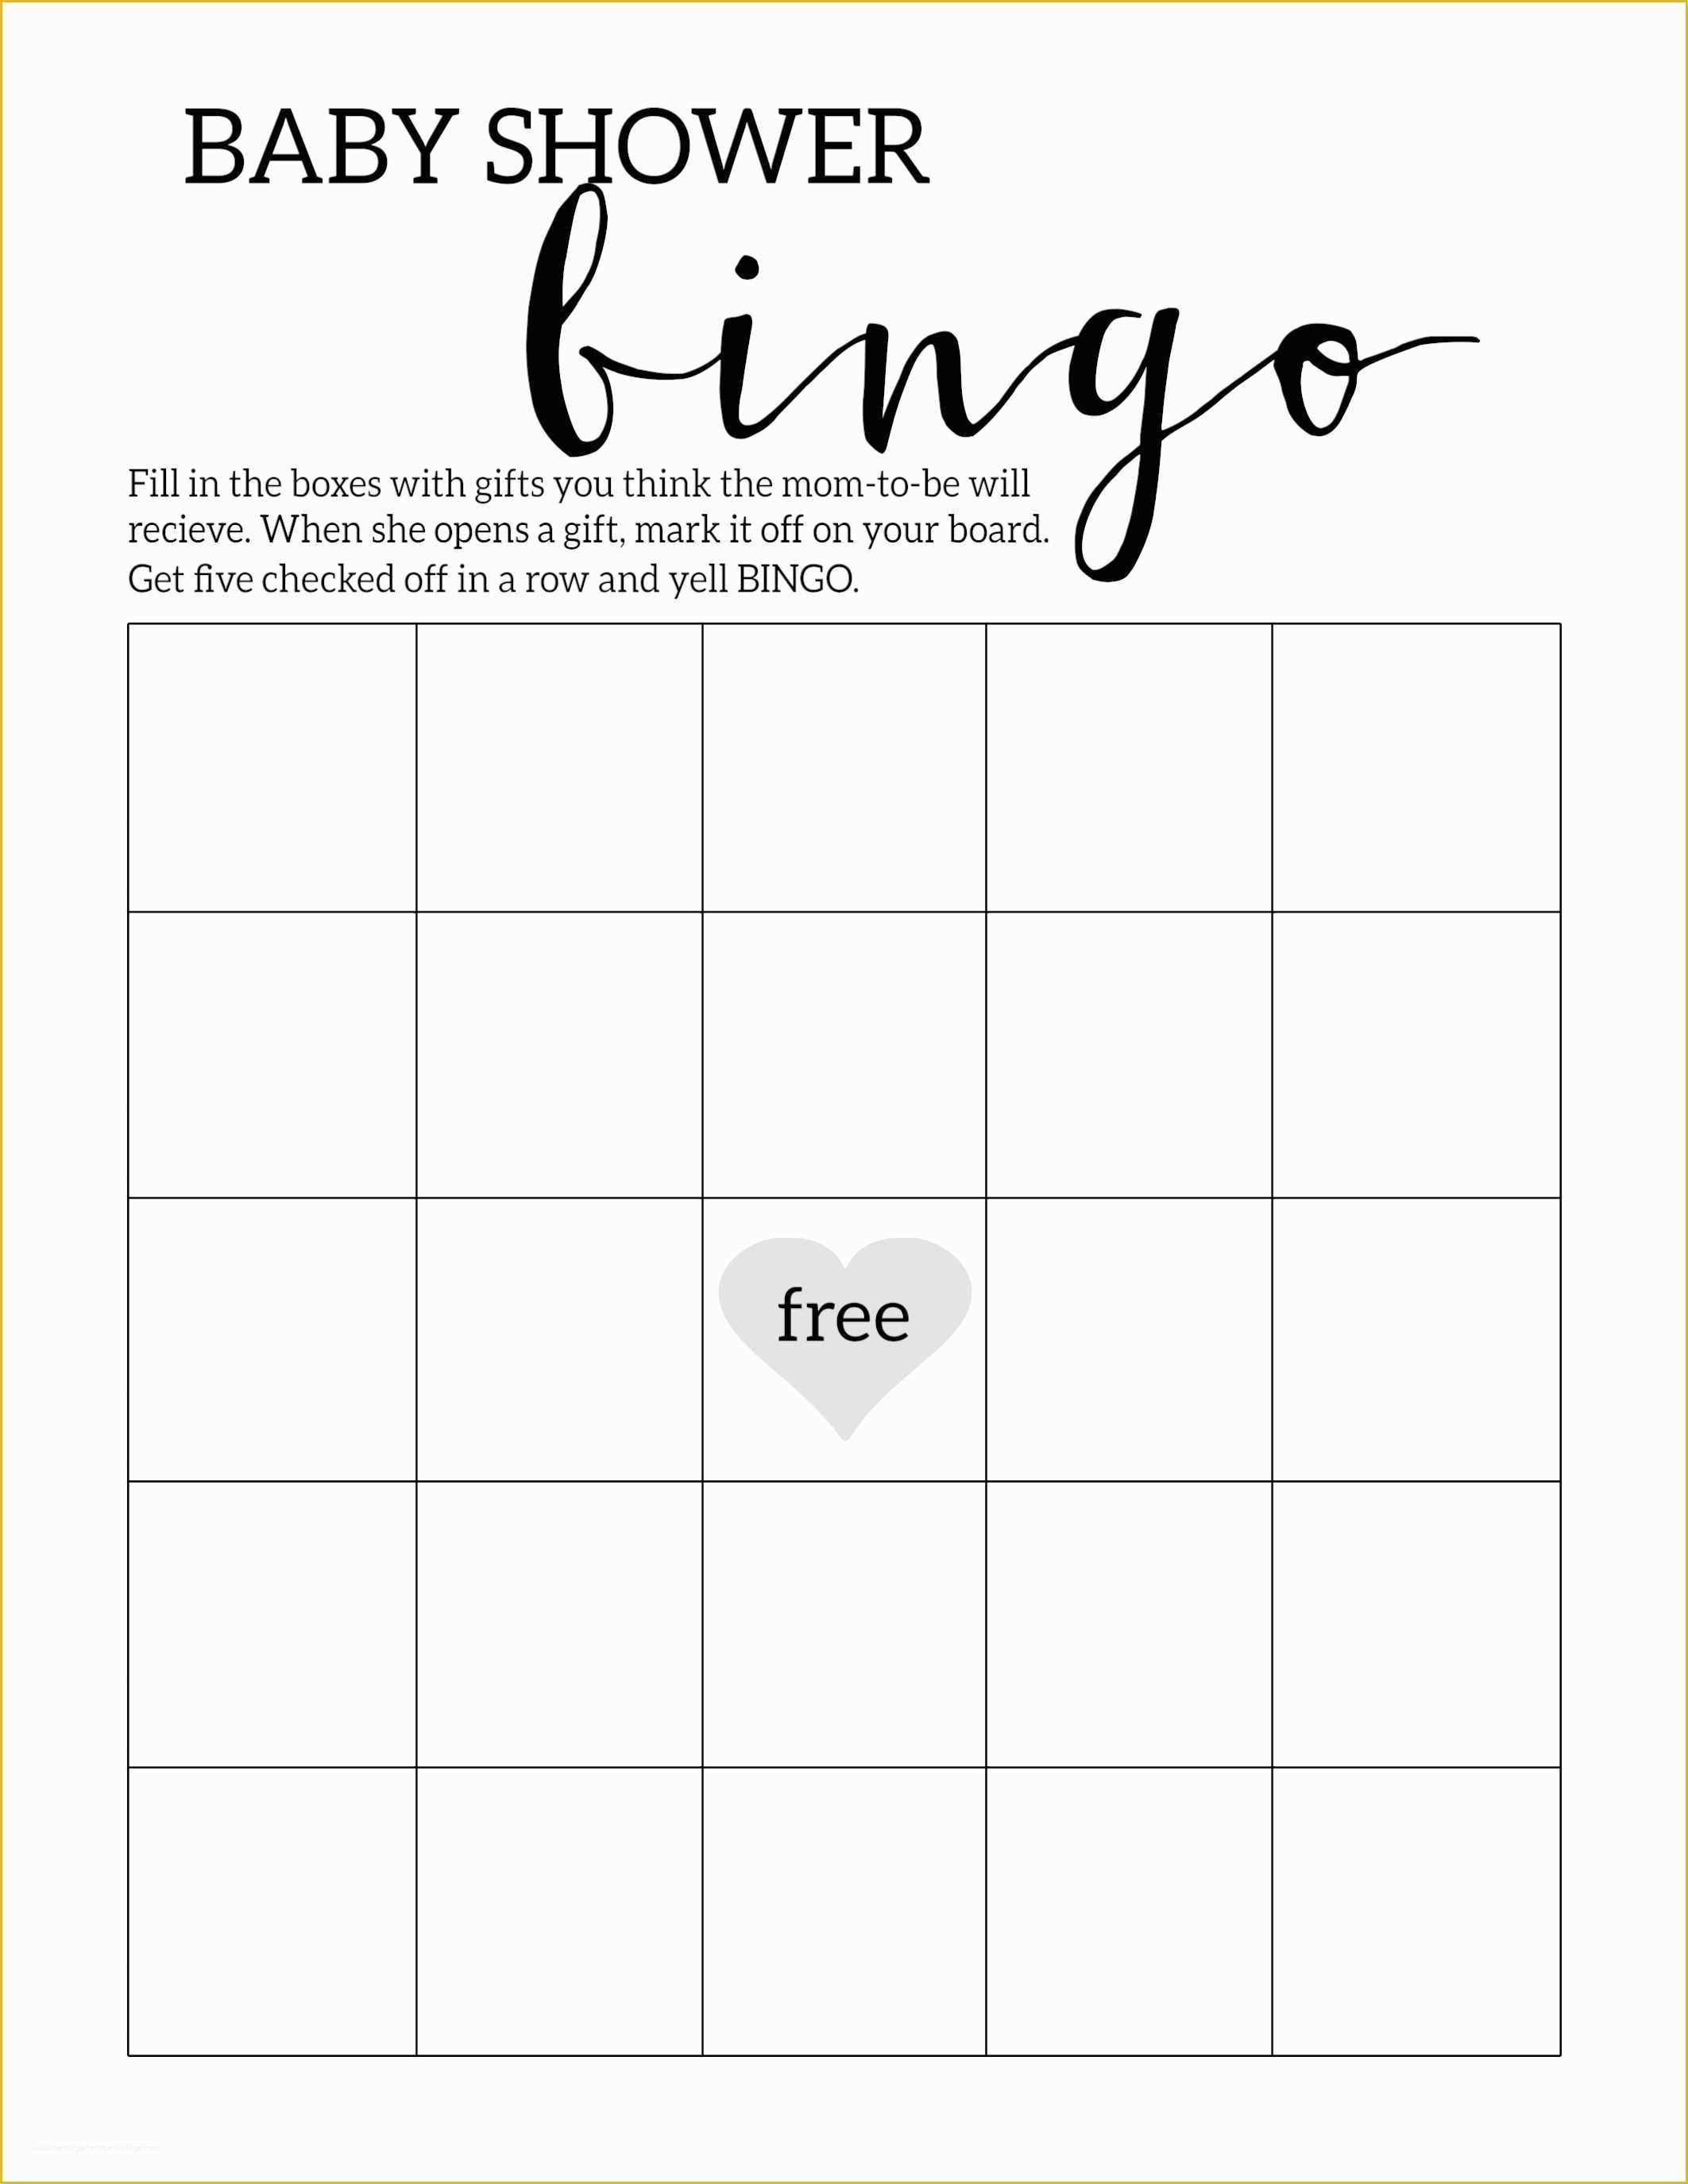 Bingo Card Template Free Of Baby Shower Bingo Printable Cards Template Paper Trail